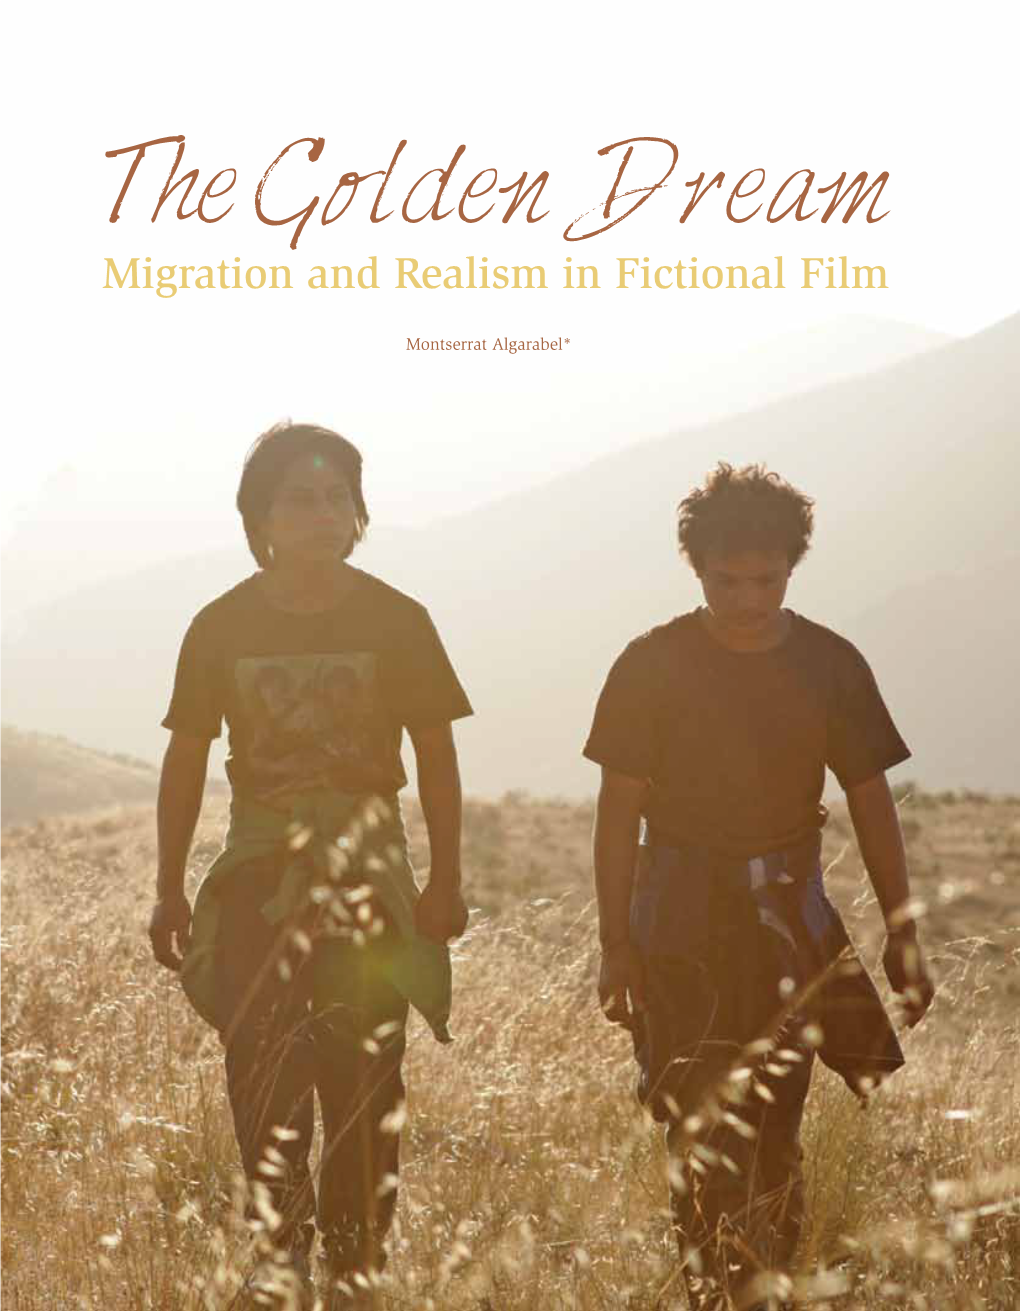 The Golden Dream Migration and Realism in Fictional Film